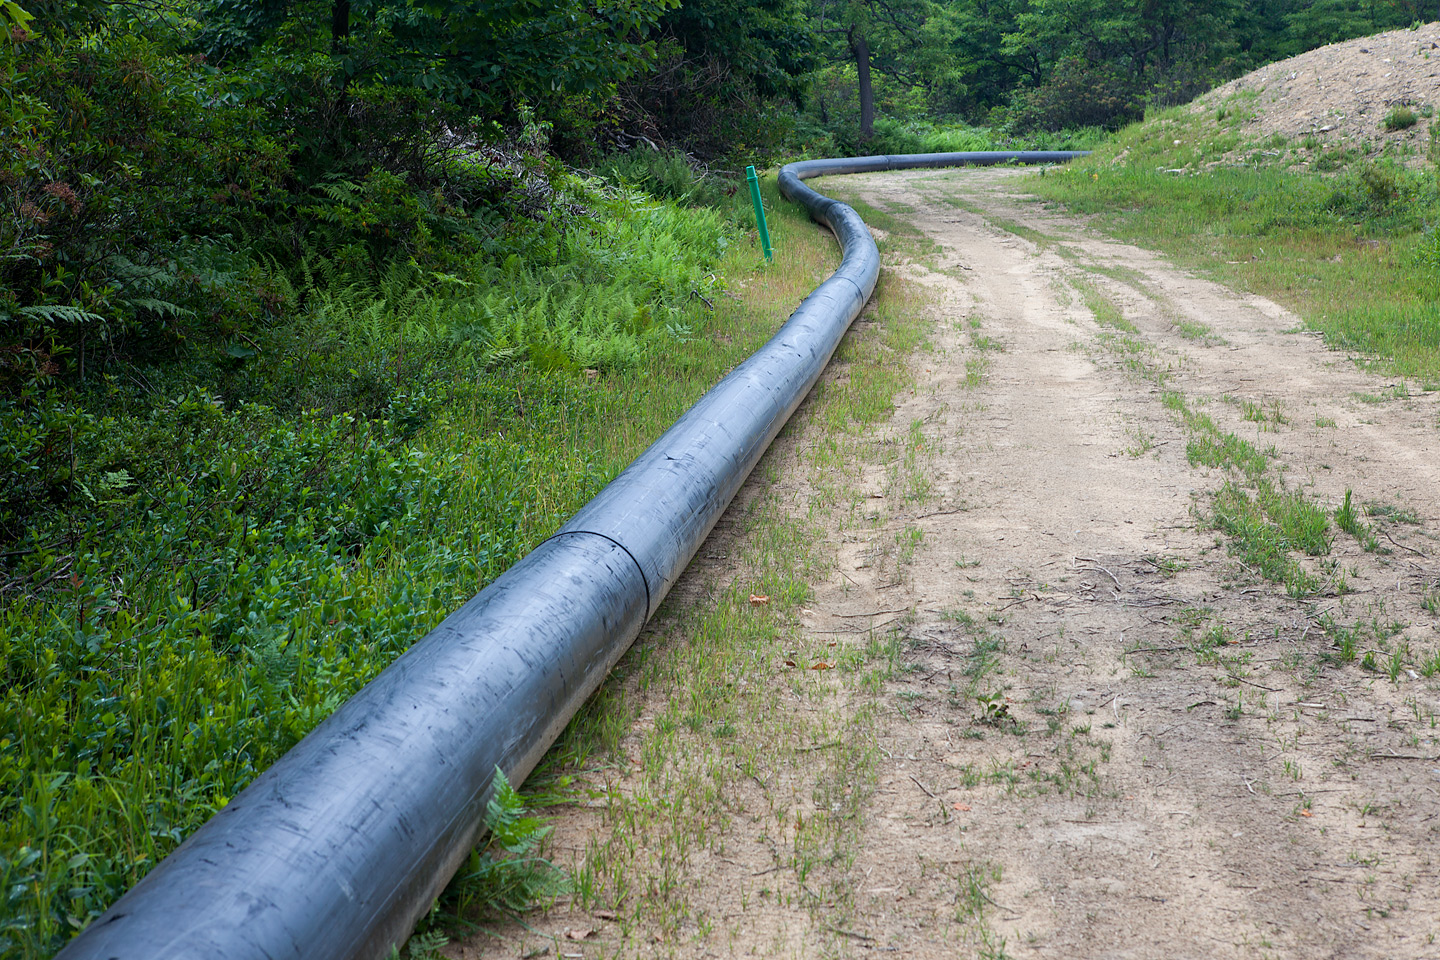 Water pipeline leading to a fracking site in Moshannon State Forest, Clearfield County, Pennsylvania.